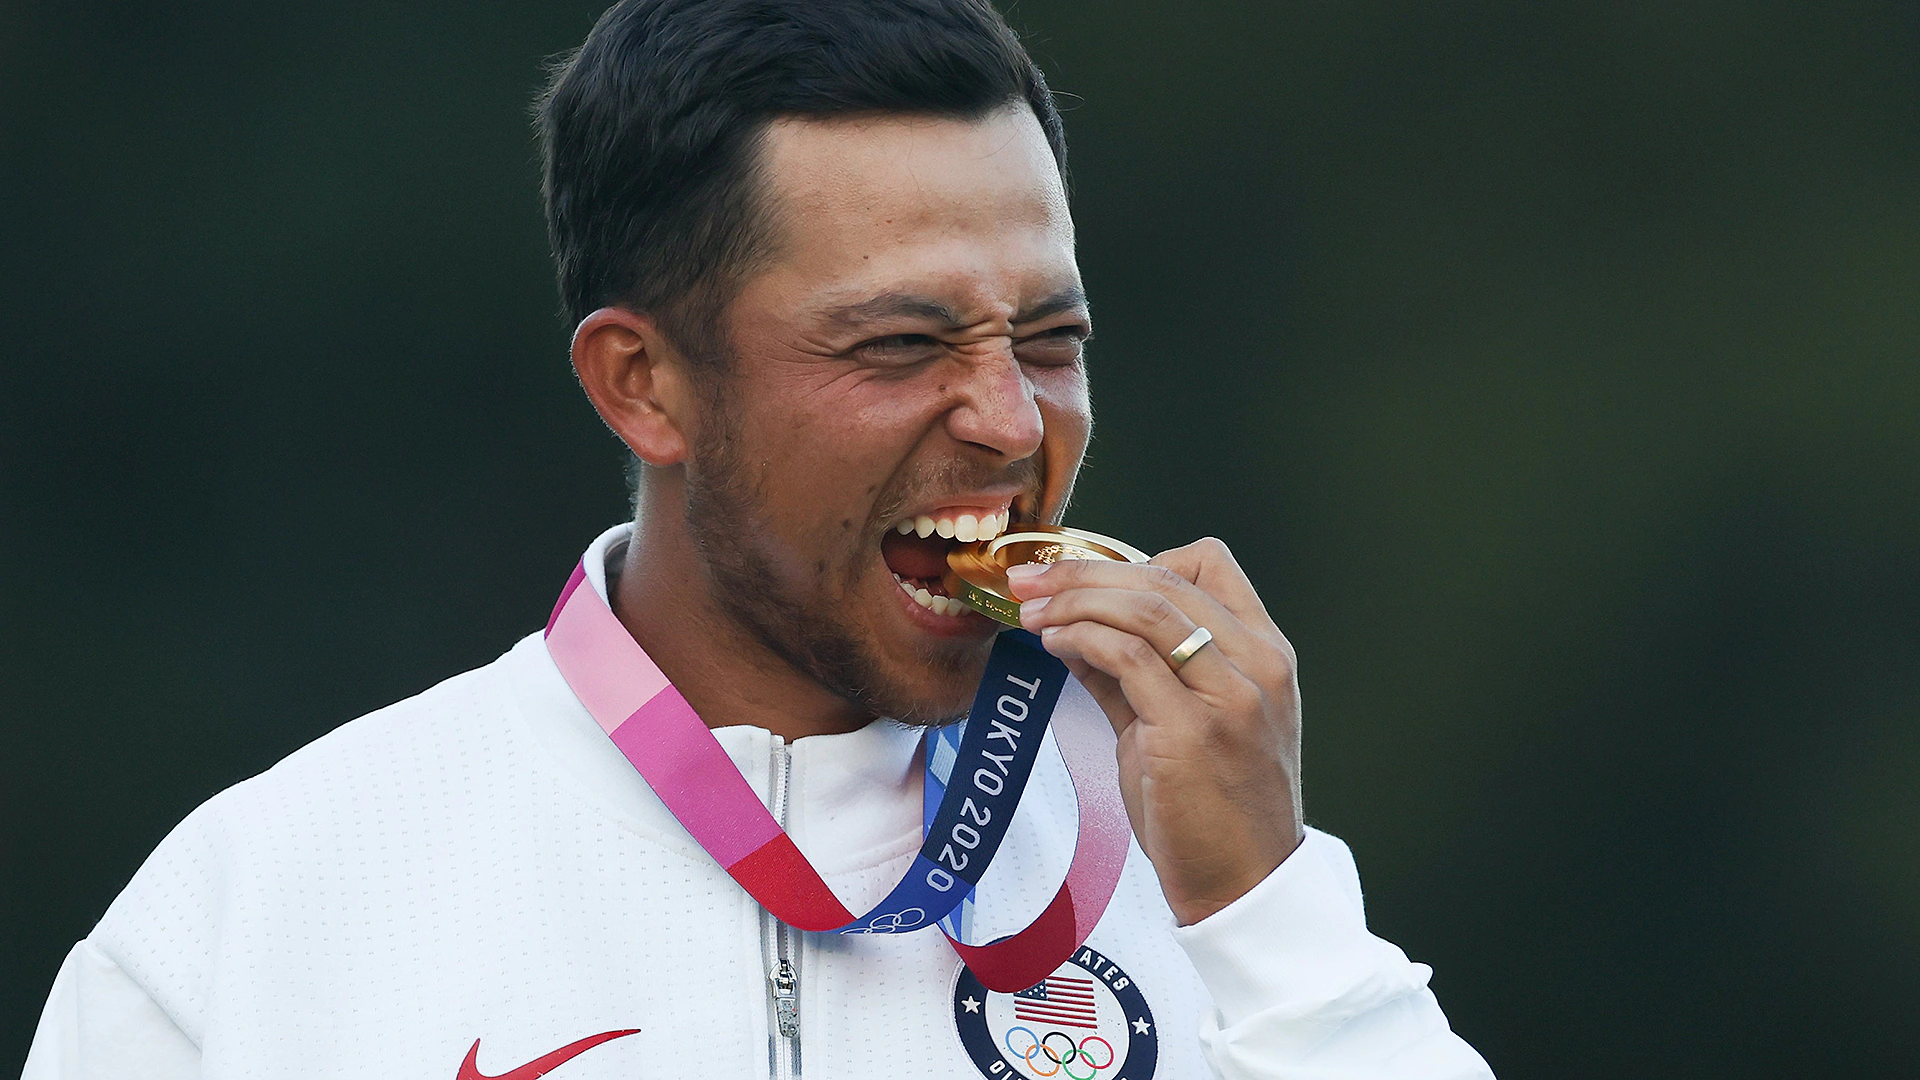 Xander Schauffele reunited with gold medal, before Dad gets it back